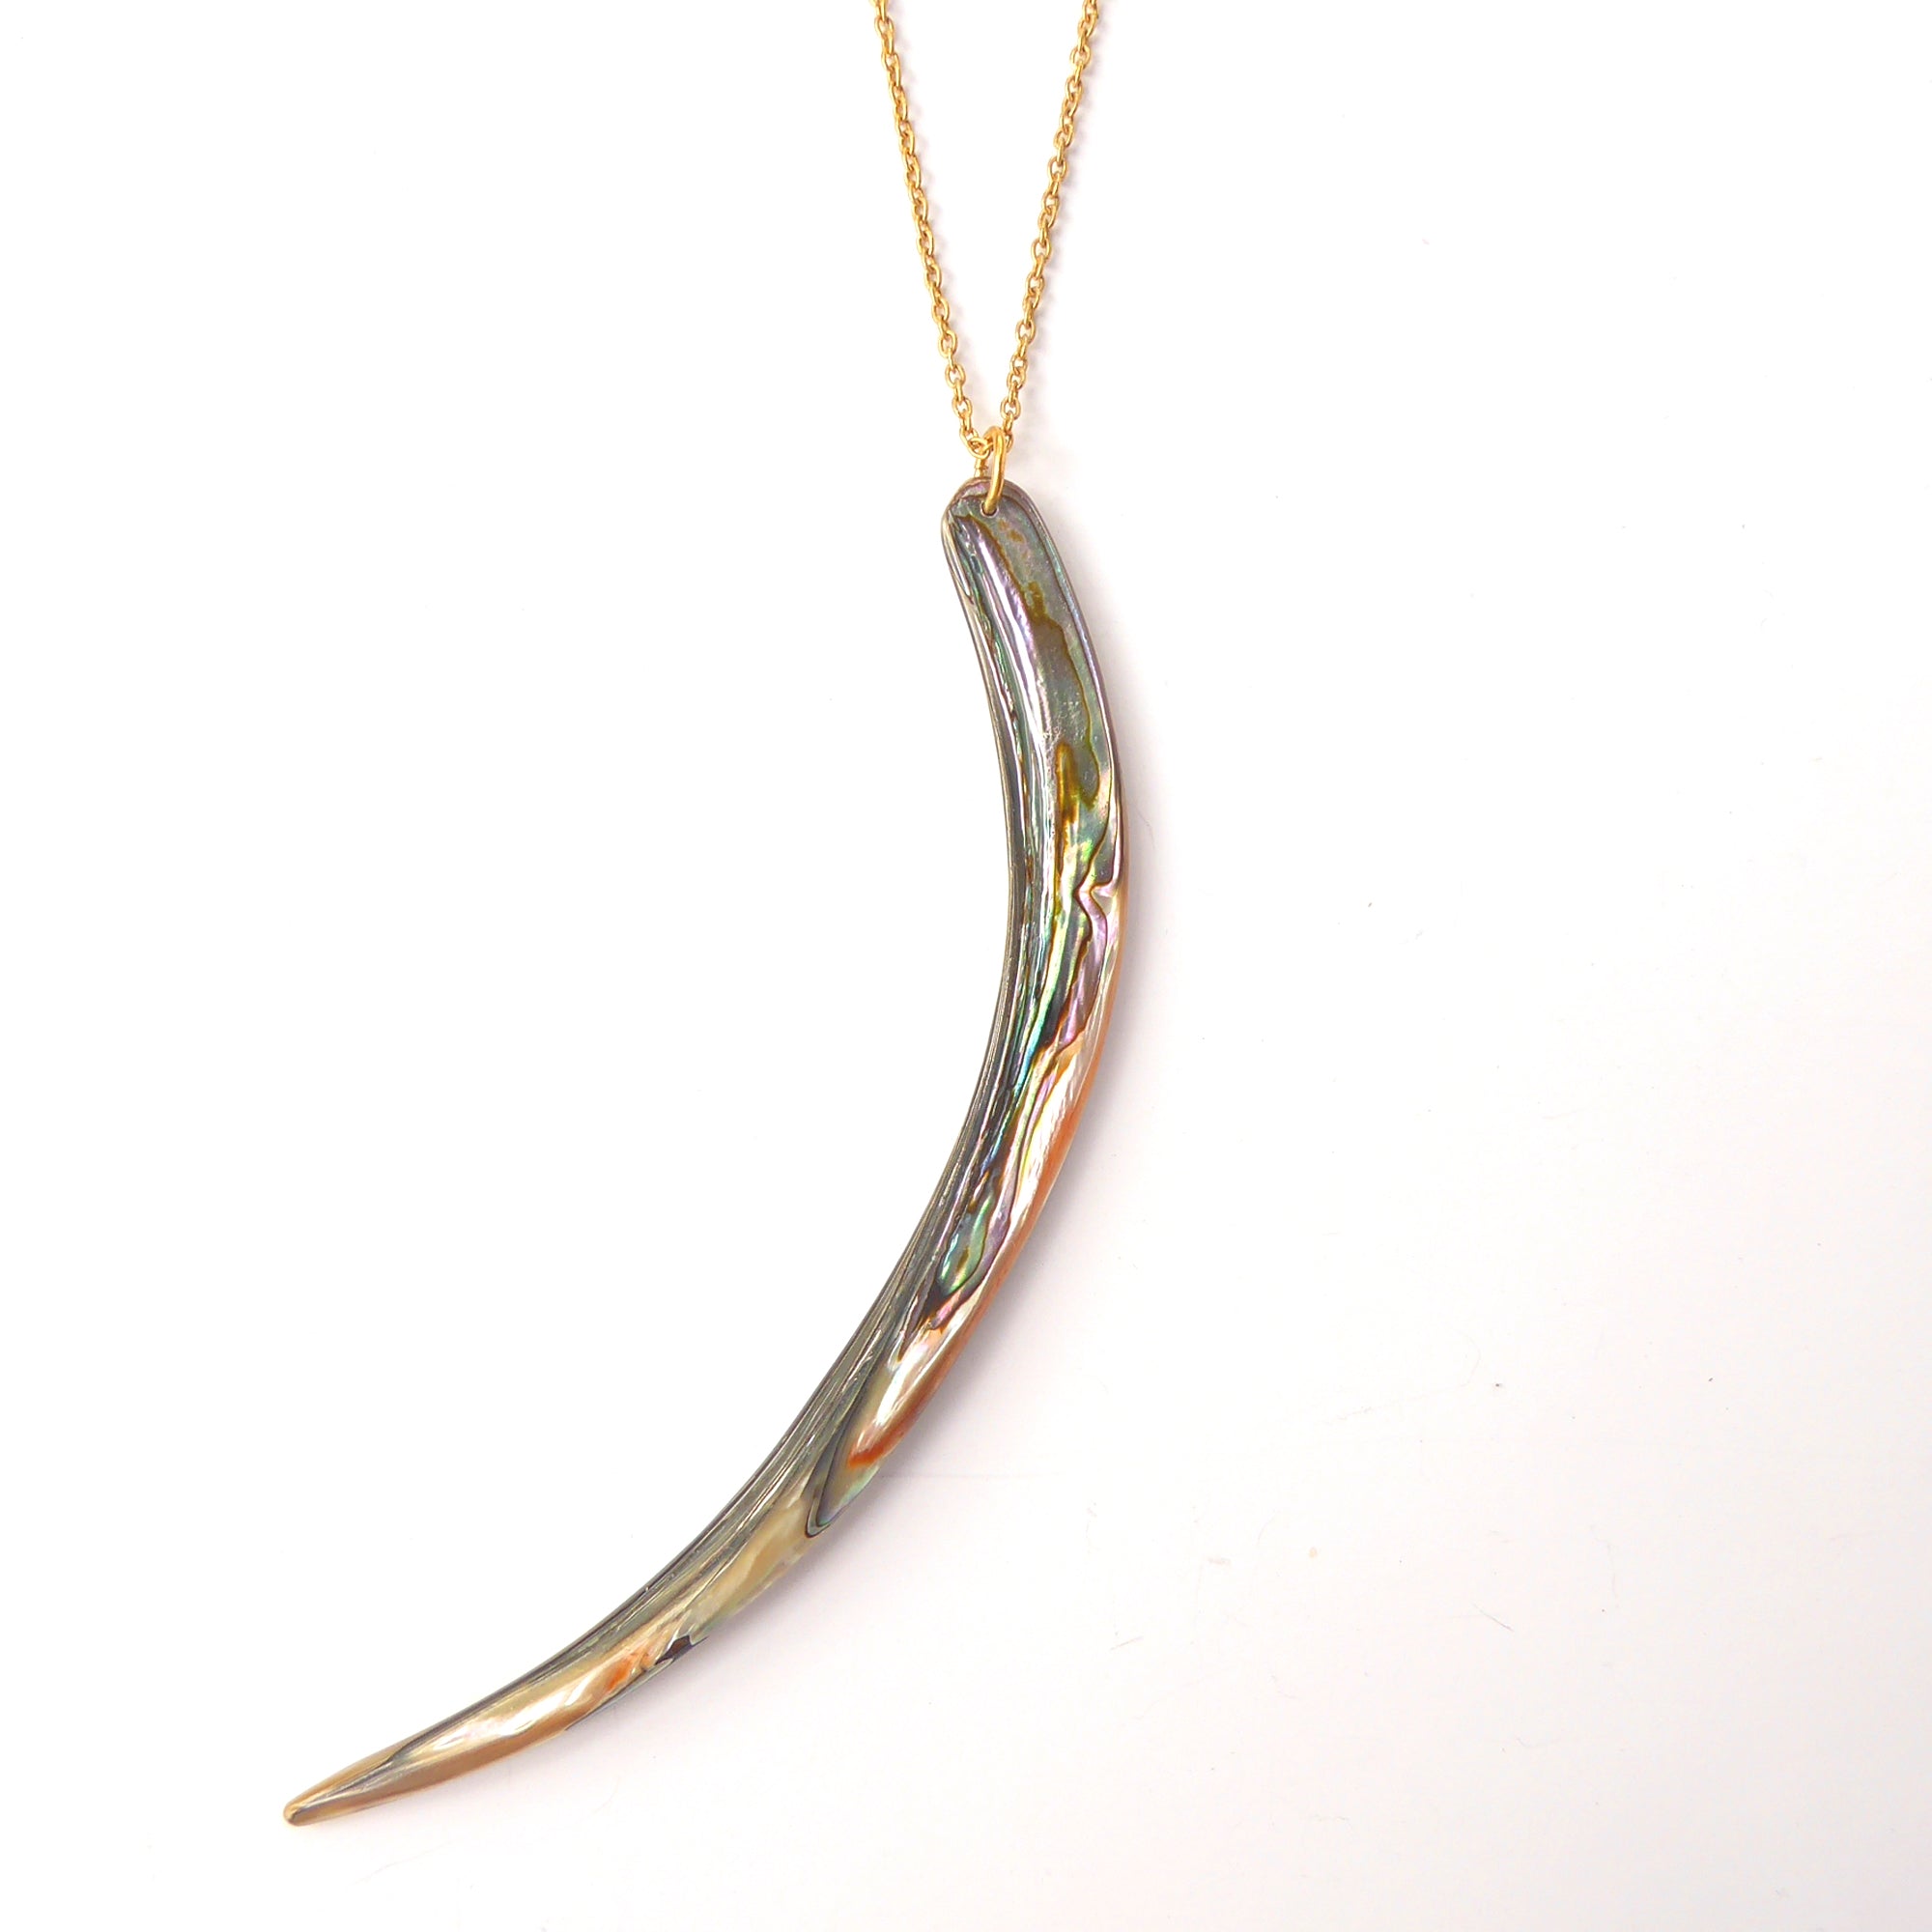 Abalone and sunstone necklace